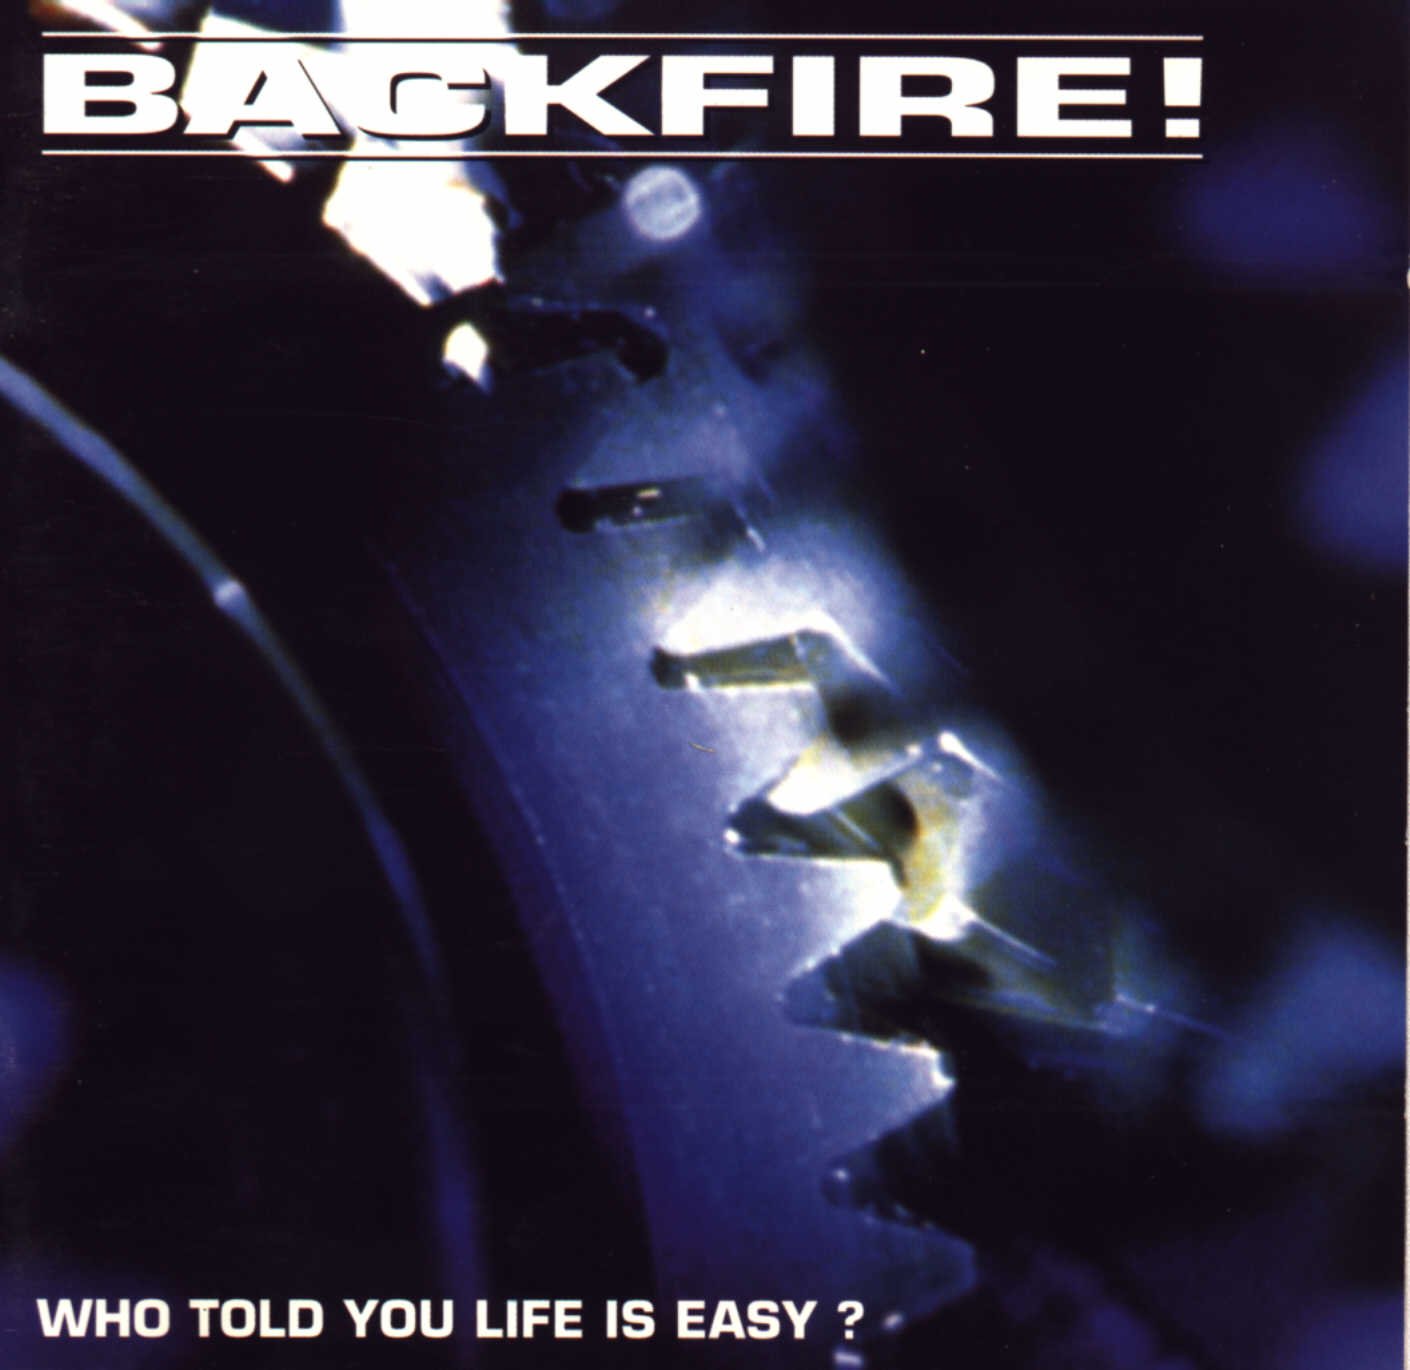 Backfire! - Who Told You Life Is Easy? (1995) FLAC Download